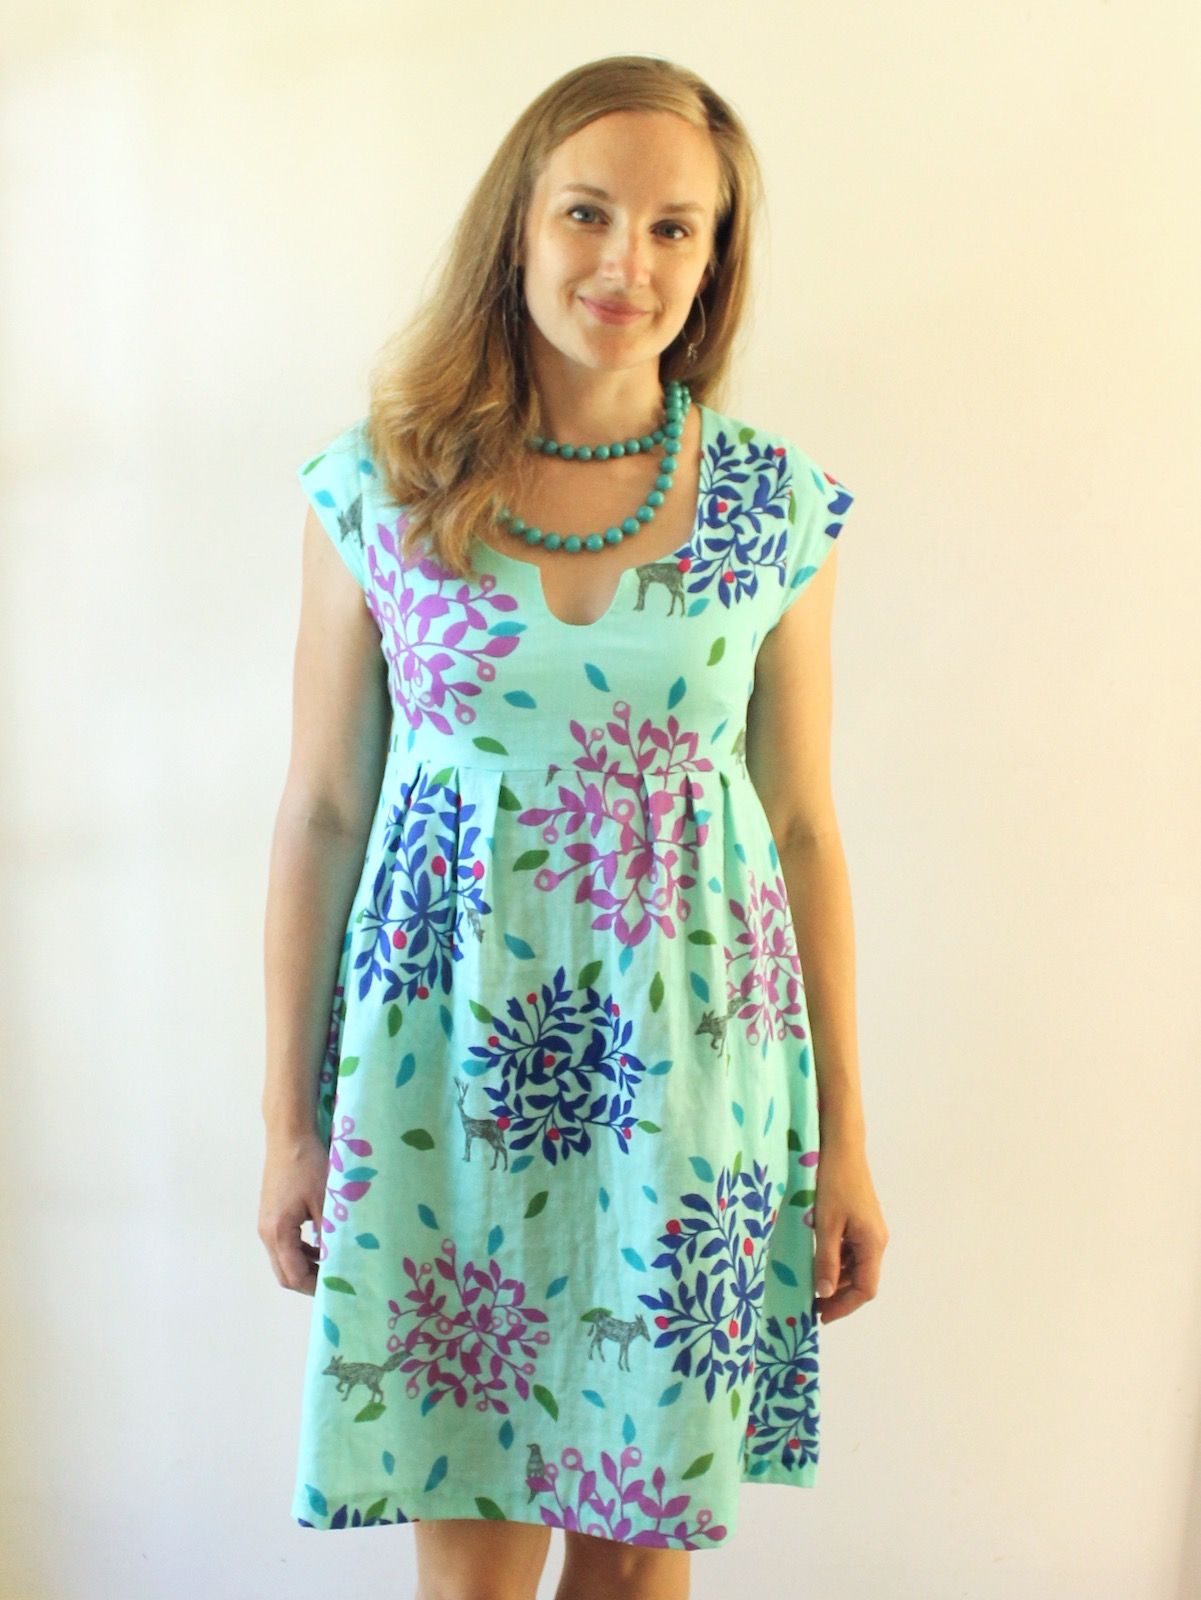 Trillium (formerly Washi) dress and top pattern Made by Rae